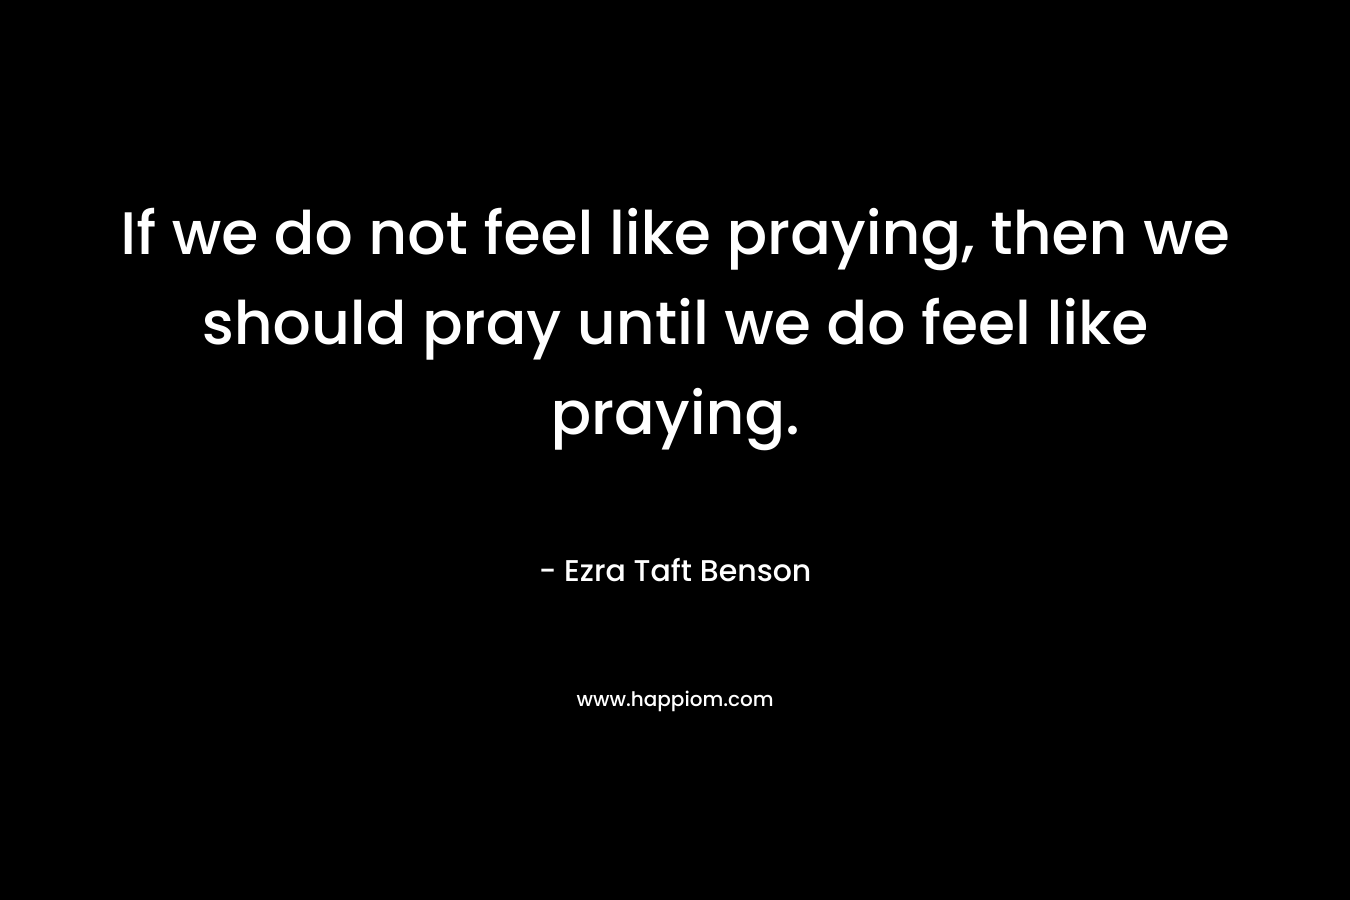 If we do not feel like praying, then we should pray until we do feel like praying.